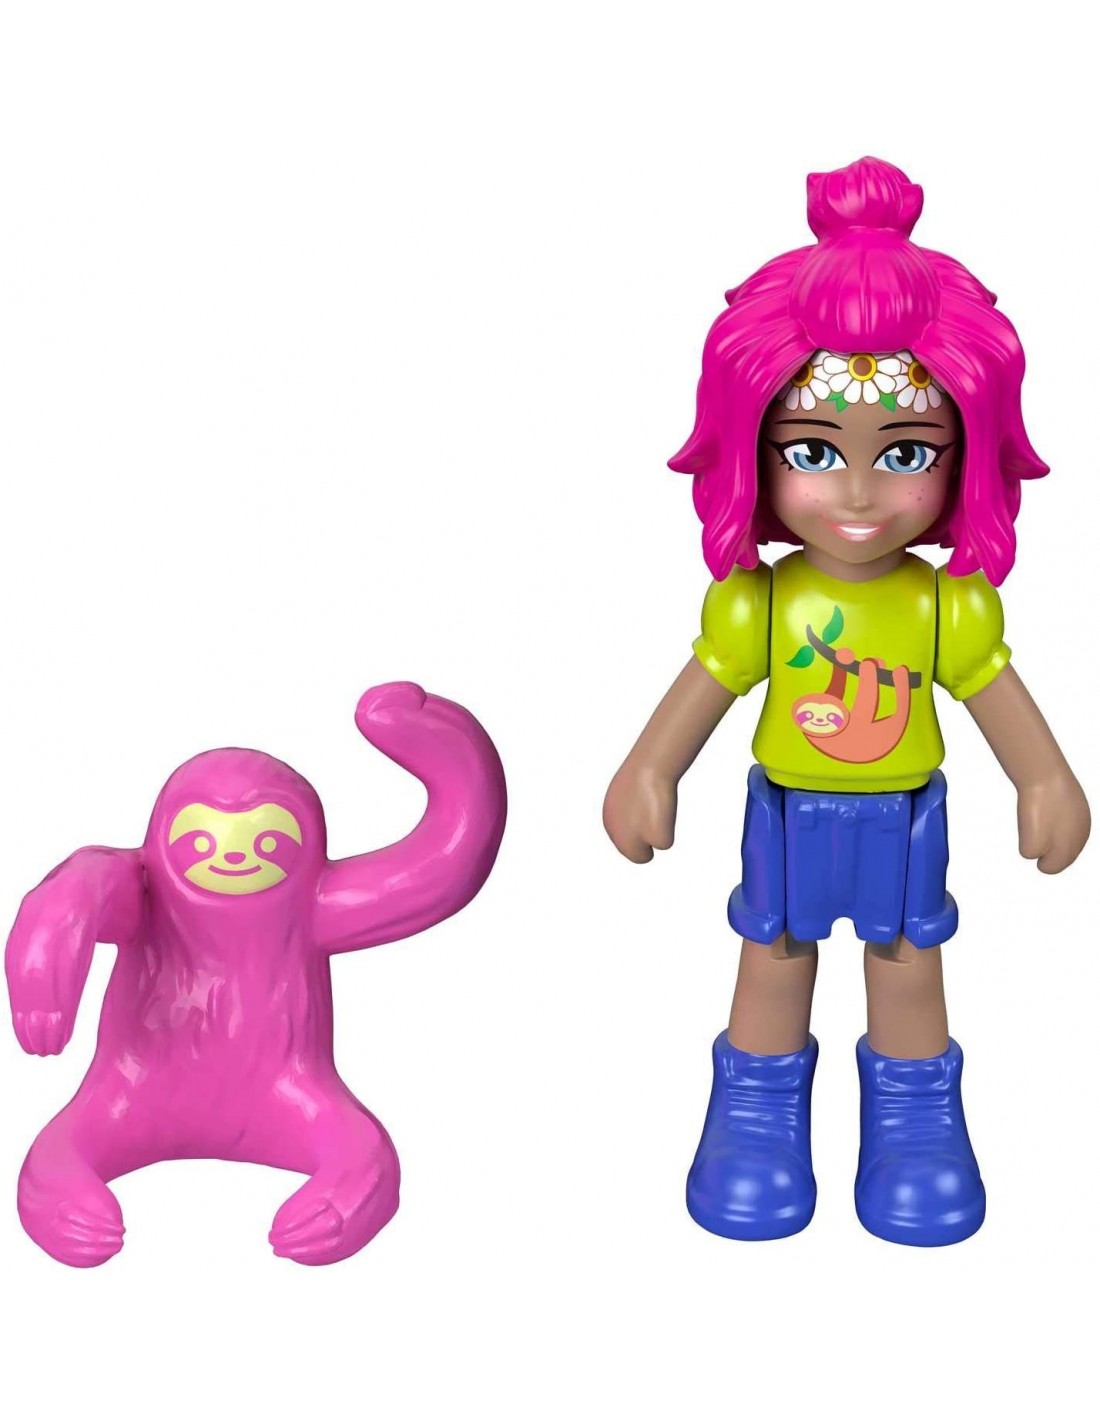 Polly Pocket Mini Σετάκια Flip And Reveal Tropical Sloth Βραδύποδας GTM56 - Polly Pocket